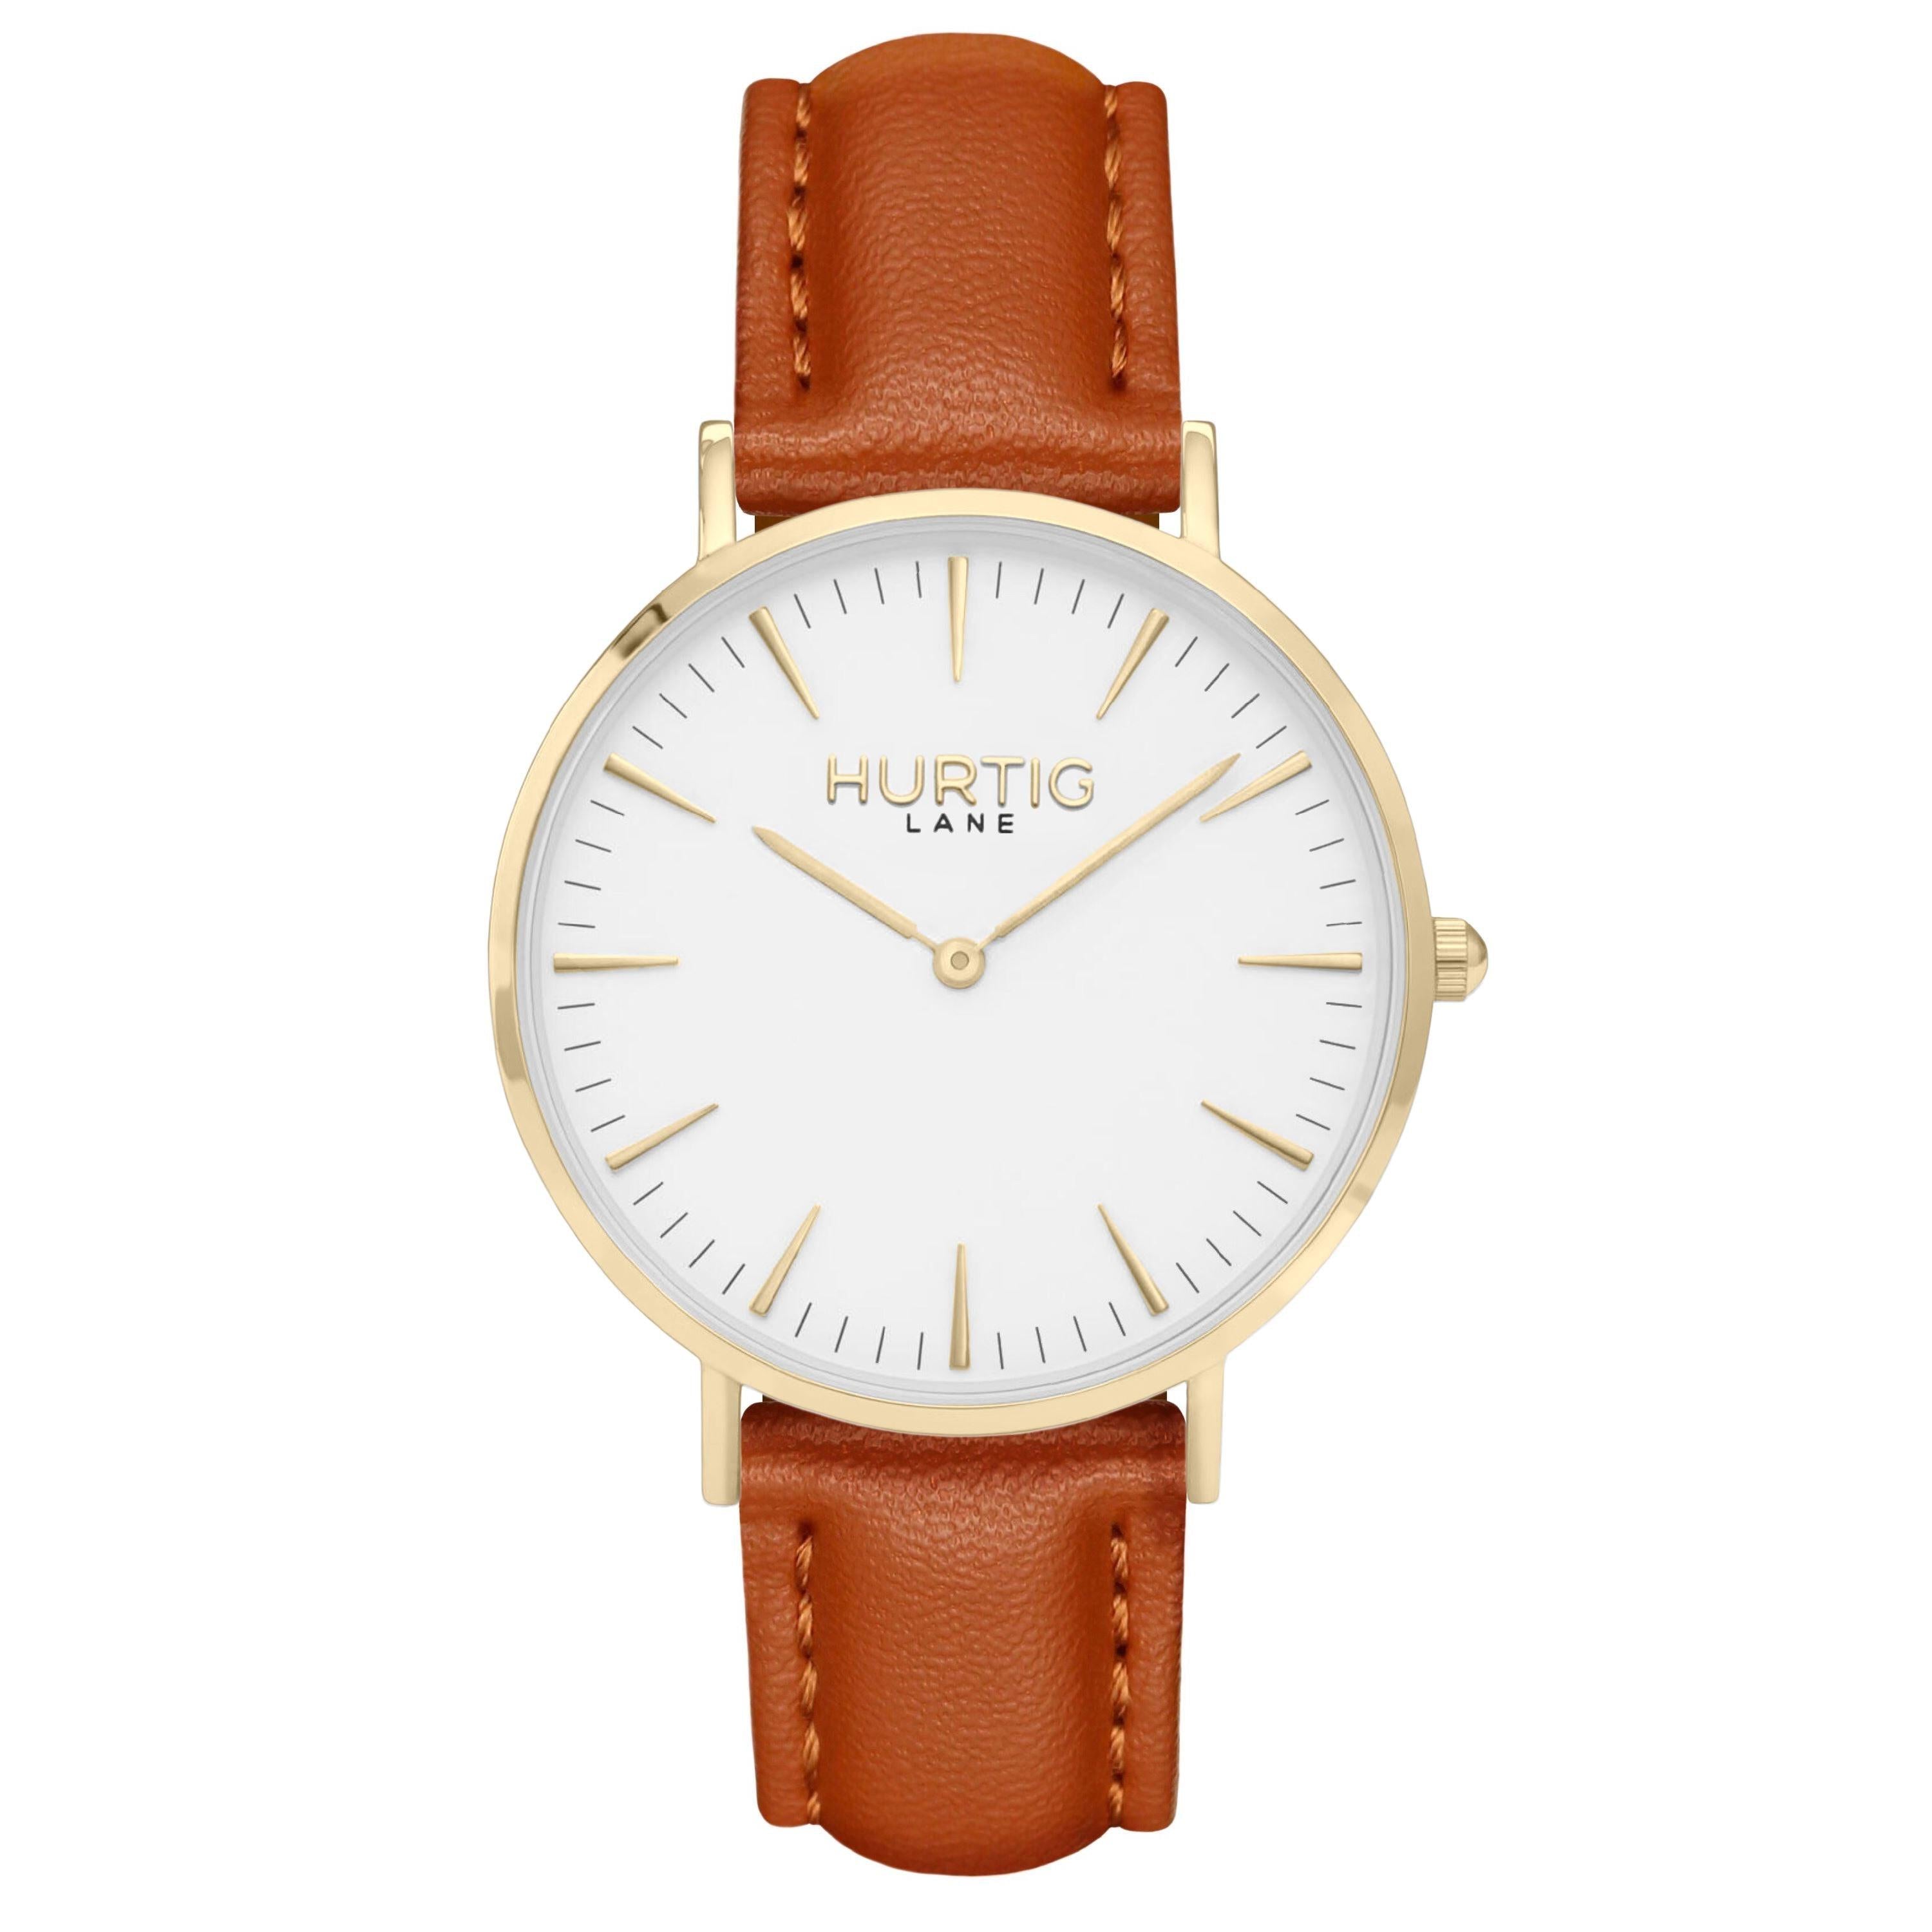 Vegan wristwatch in Gold with White dial